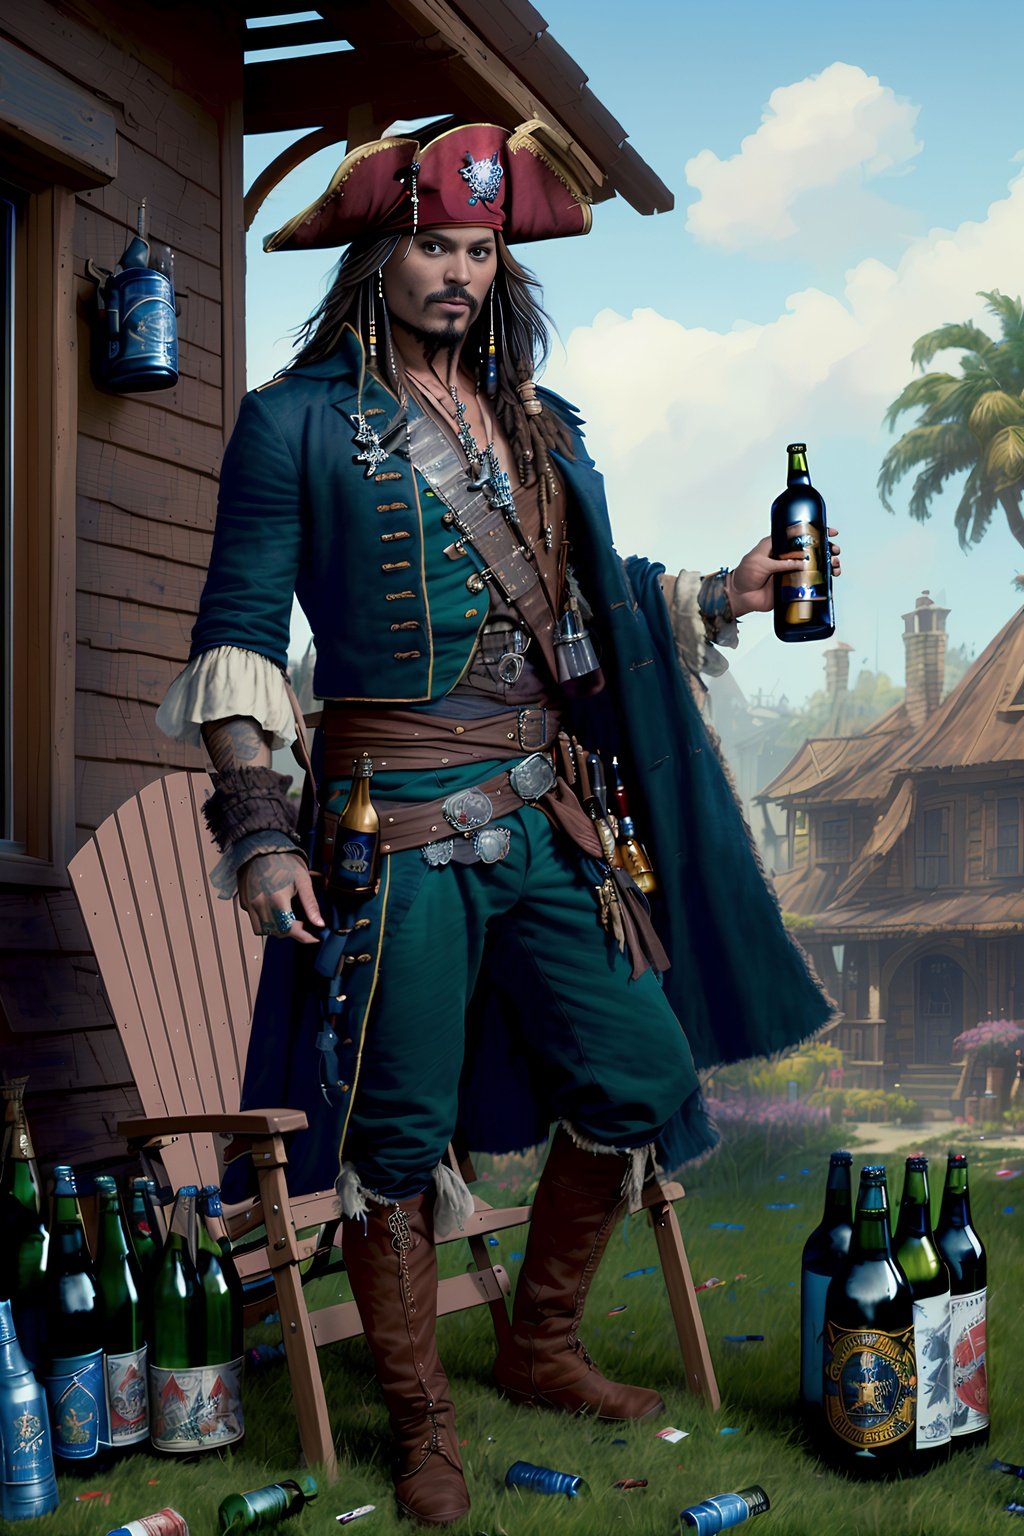 Prompt: high-quality high-detail highly-detailed breathtaking hero ((by Aleksi Briclot and Eddie Mendoza)) - Johnny Depp as (Jack Sparrow) sitting on ((cheap foldable lawn chair in his front-yard)), (bottles of beer), (drunk holding a bottle of beer in hand), (((empty beer bottles litter the ground))), suburbia.